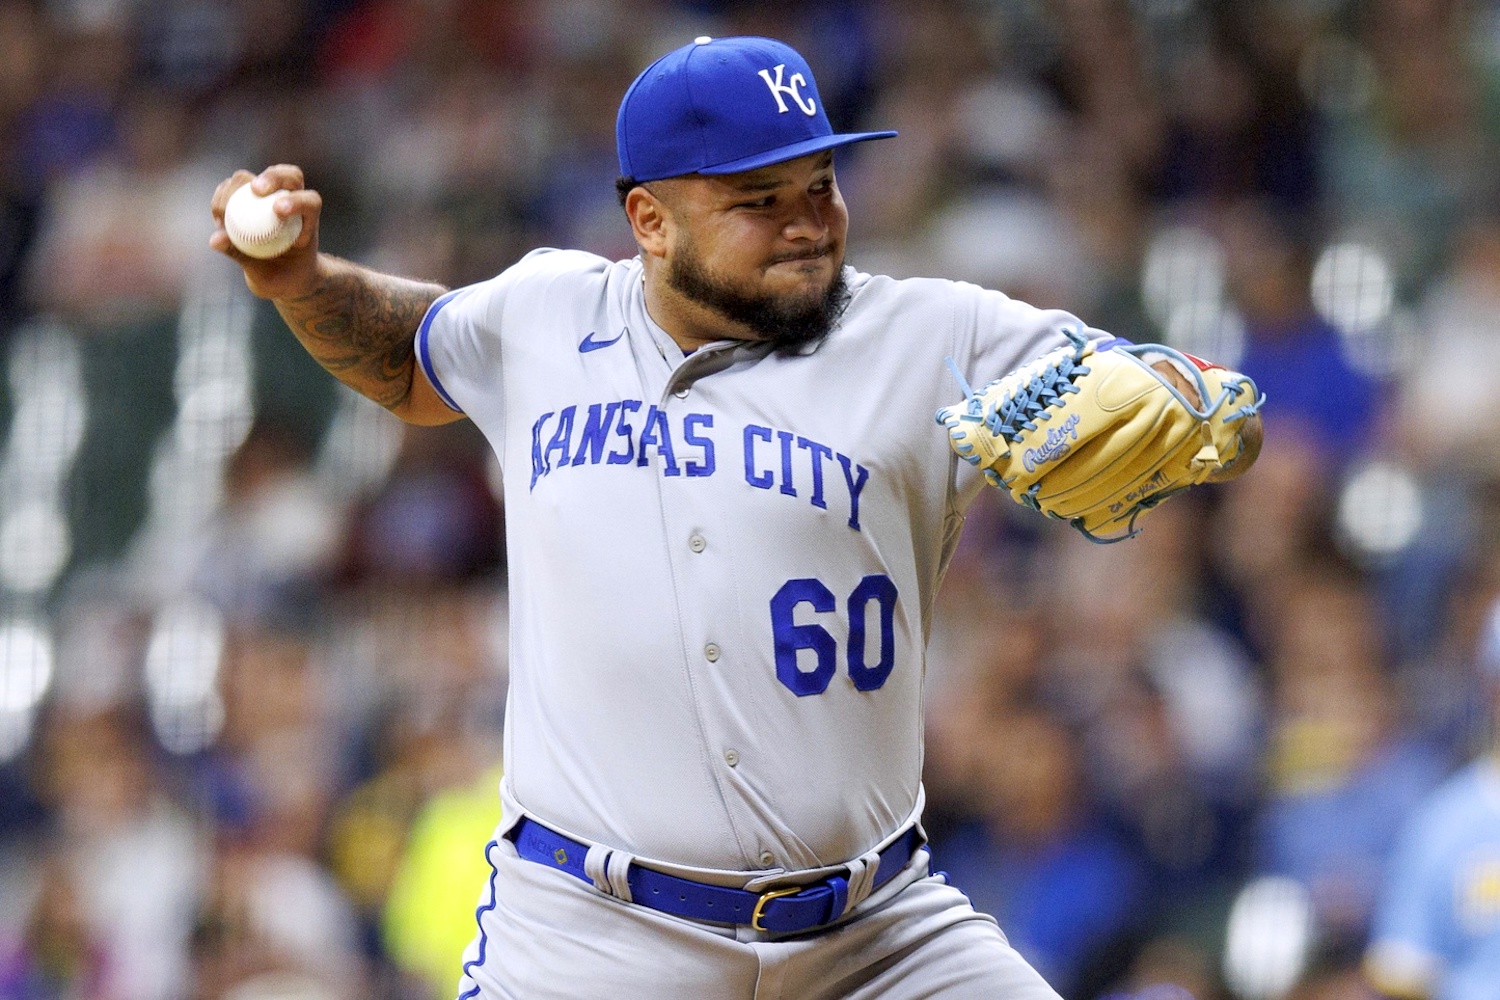 May 12, 2023; Milwaukee, Wisconsin, USA; Kansas City Royals pitcher Max Castillo (60) throws a pitch during the second inning against the Milwaukee Brewers at American Family Field. Mandatory Credit: Jeff Hanisch-USA TODAY Sports